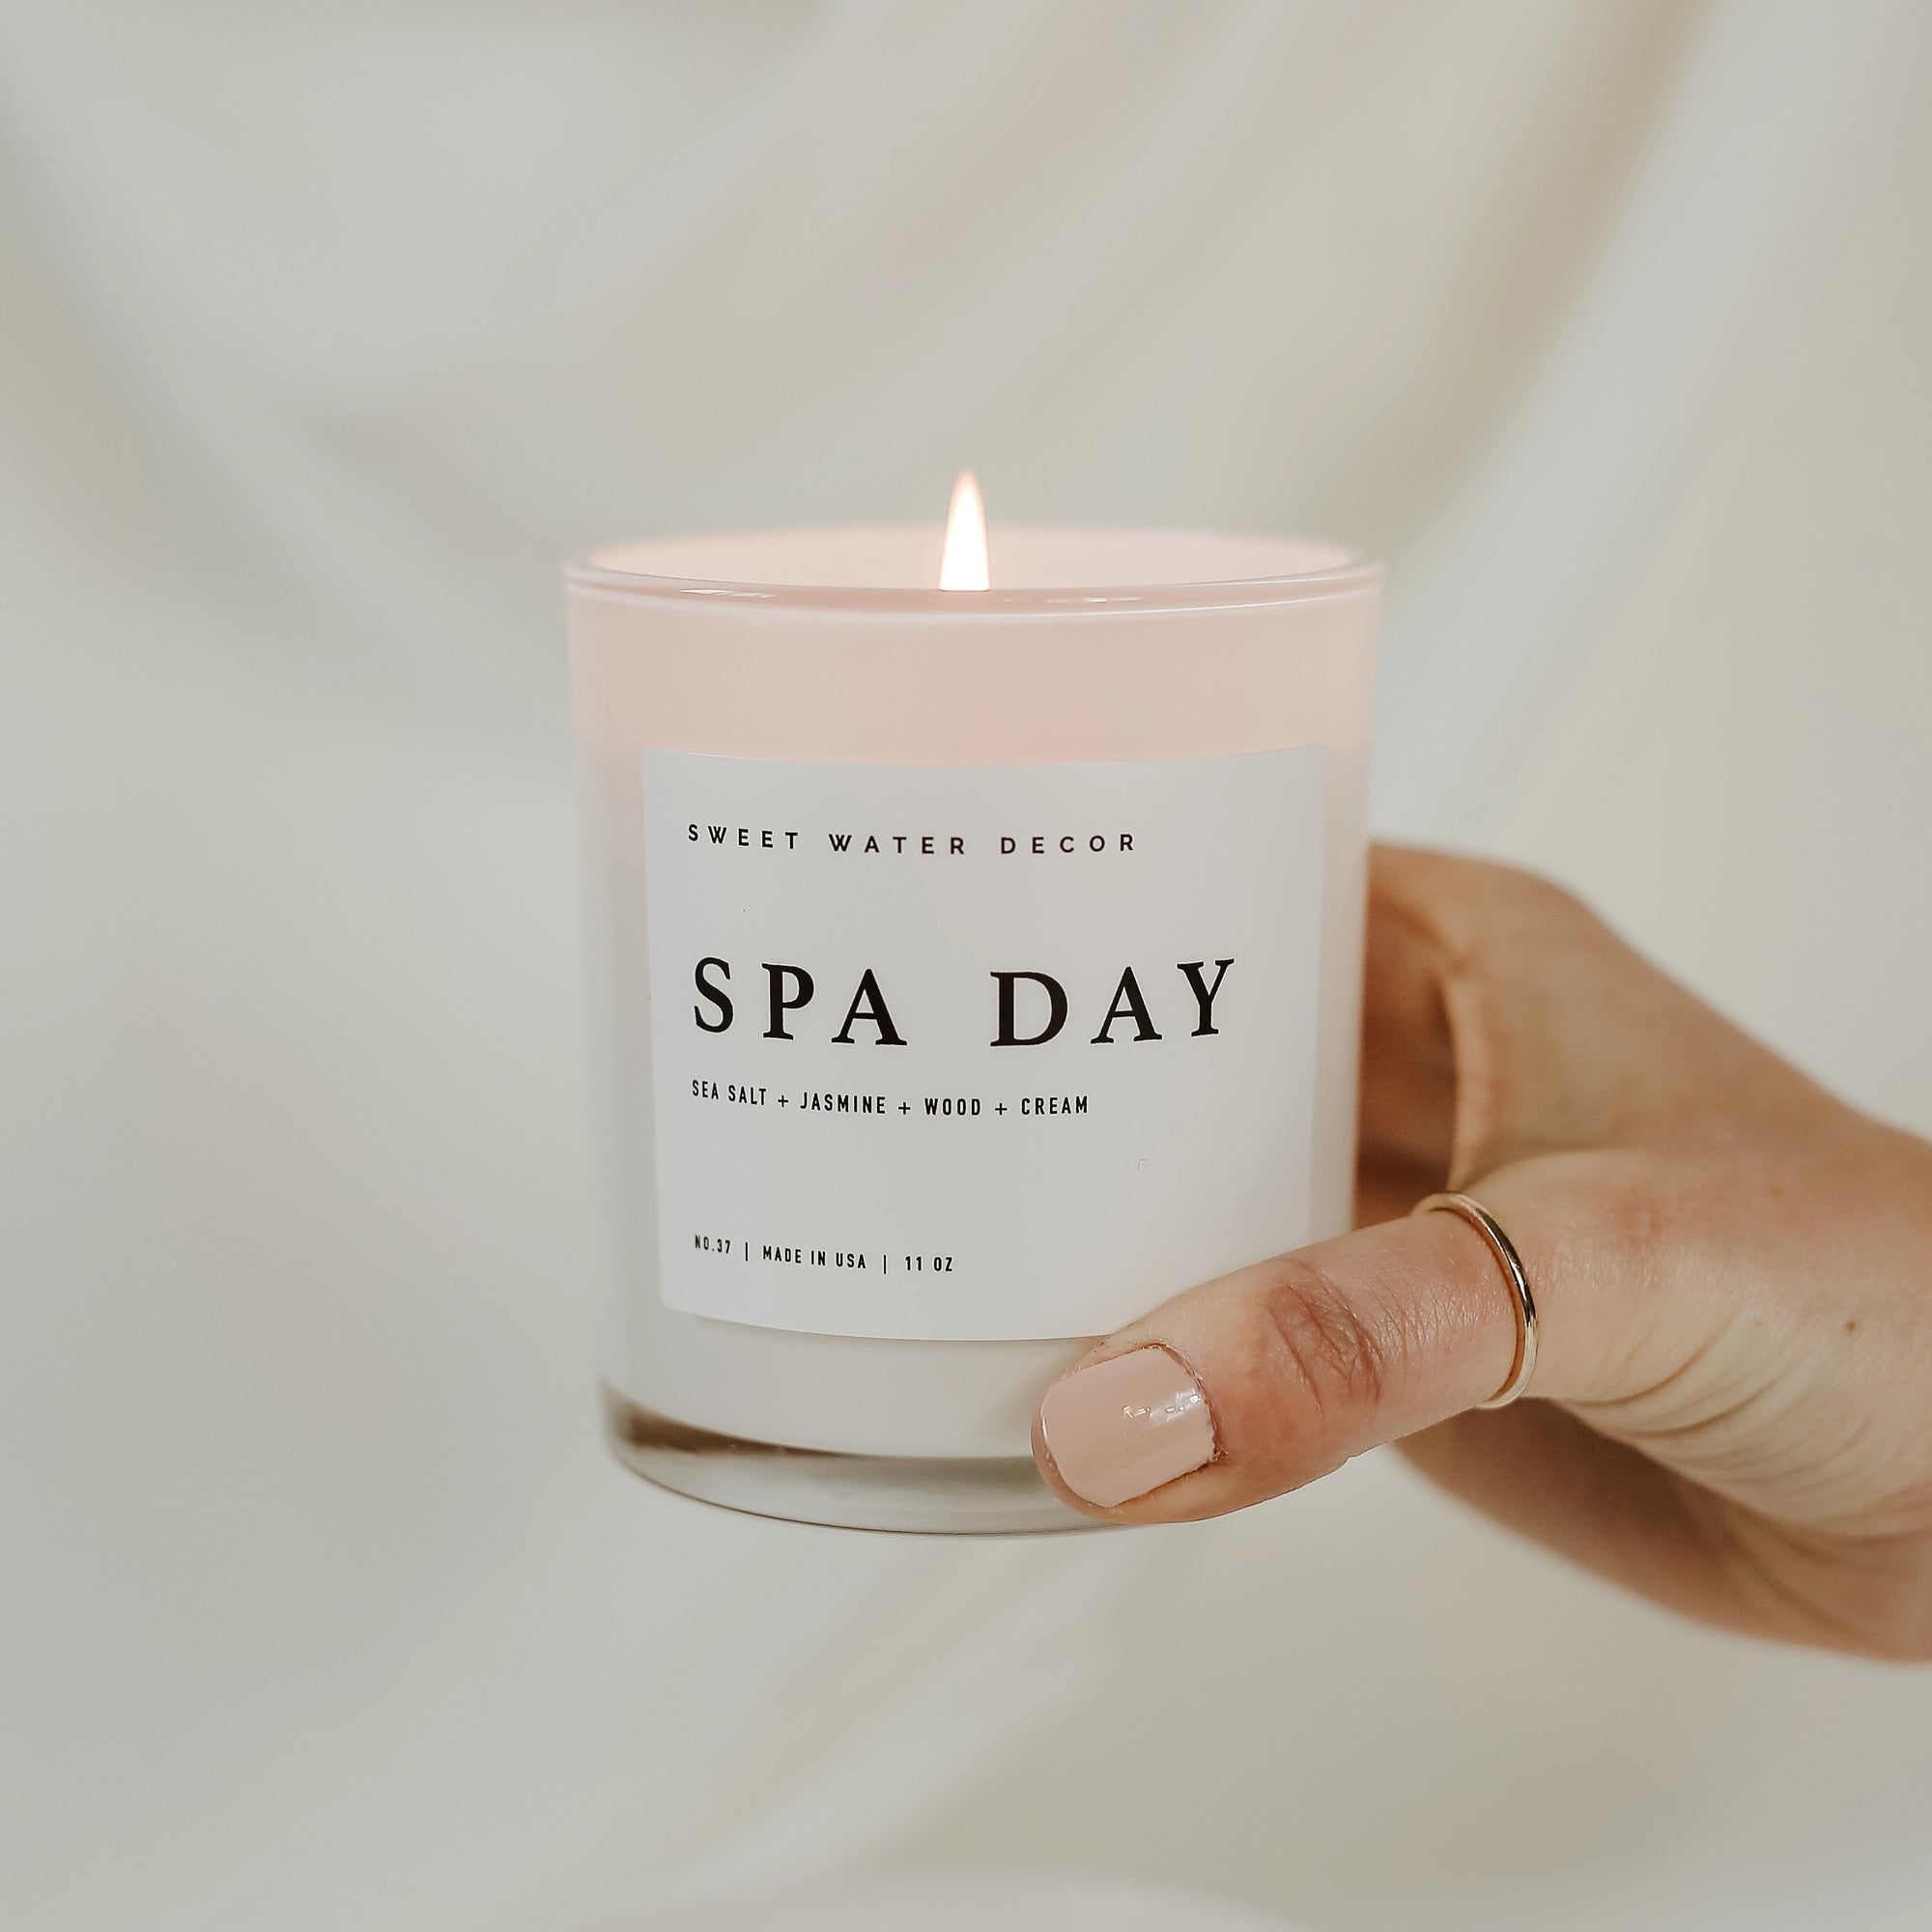 &#39;Spa Day&#39; soy candle lit and held up in one hand.